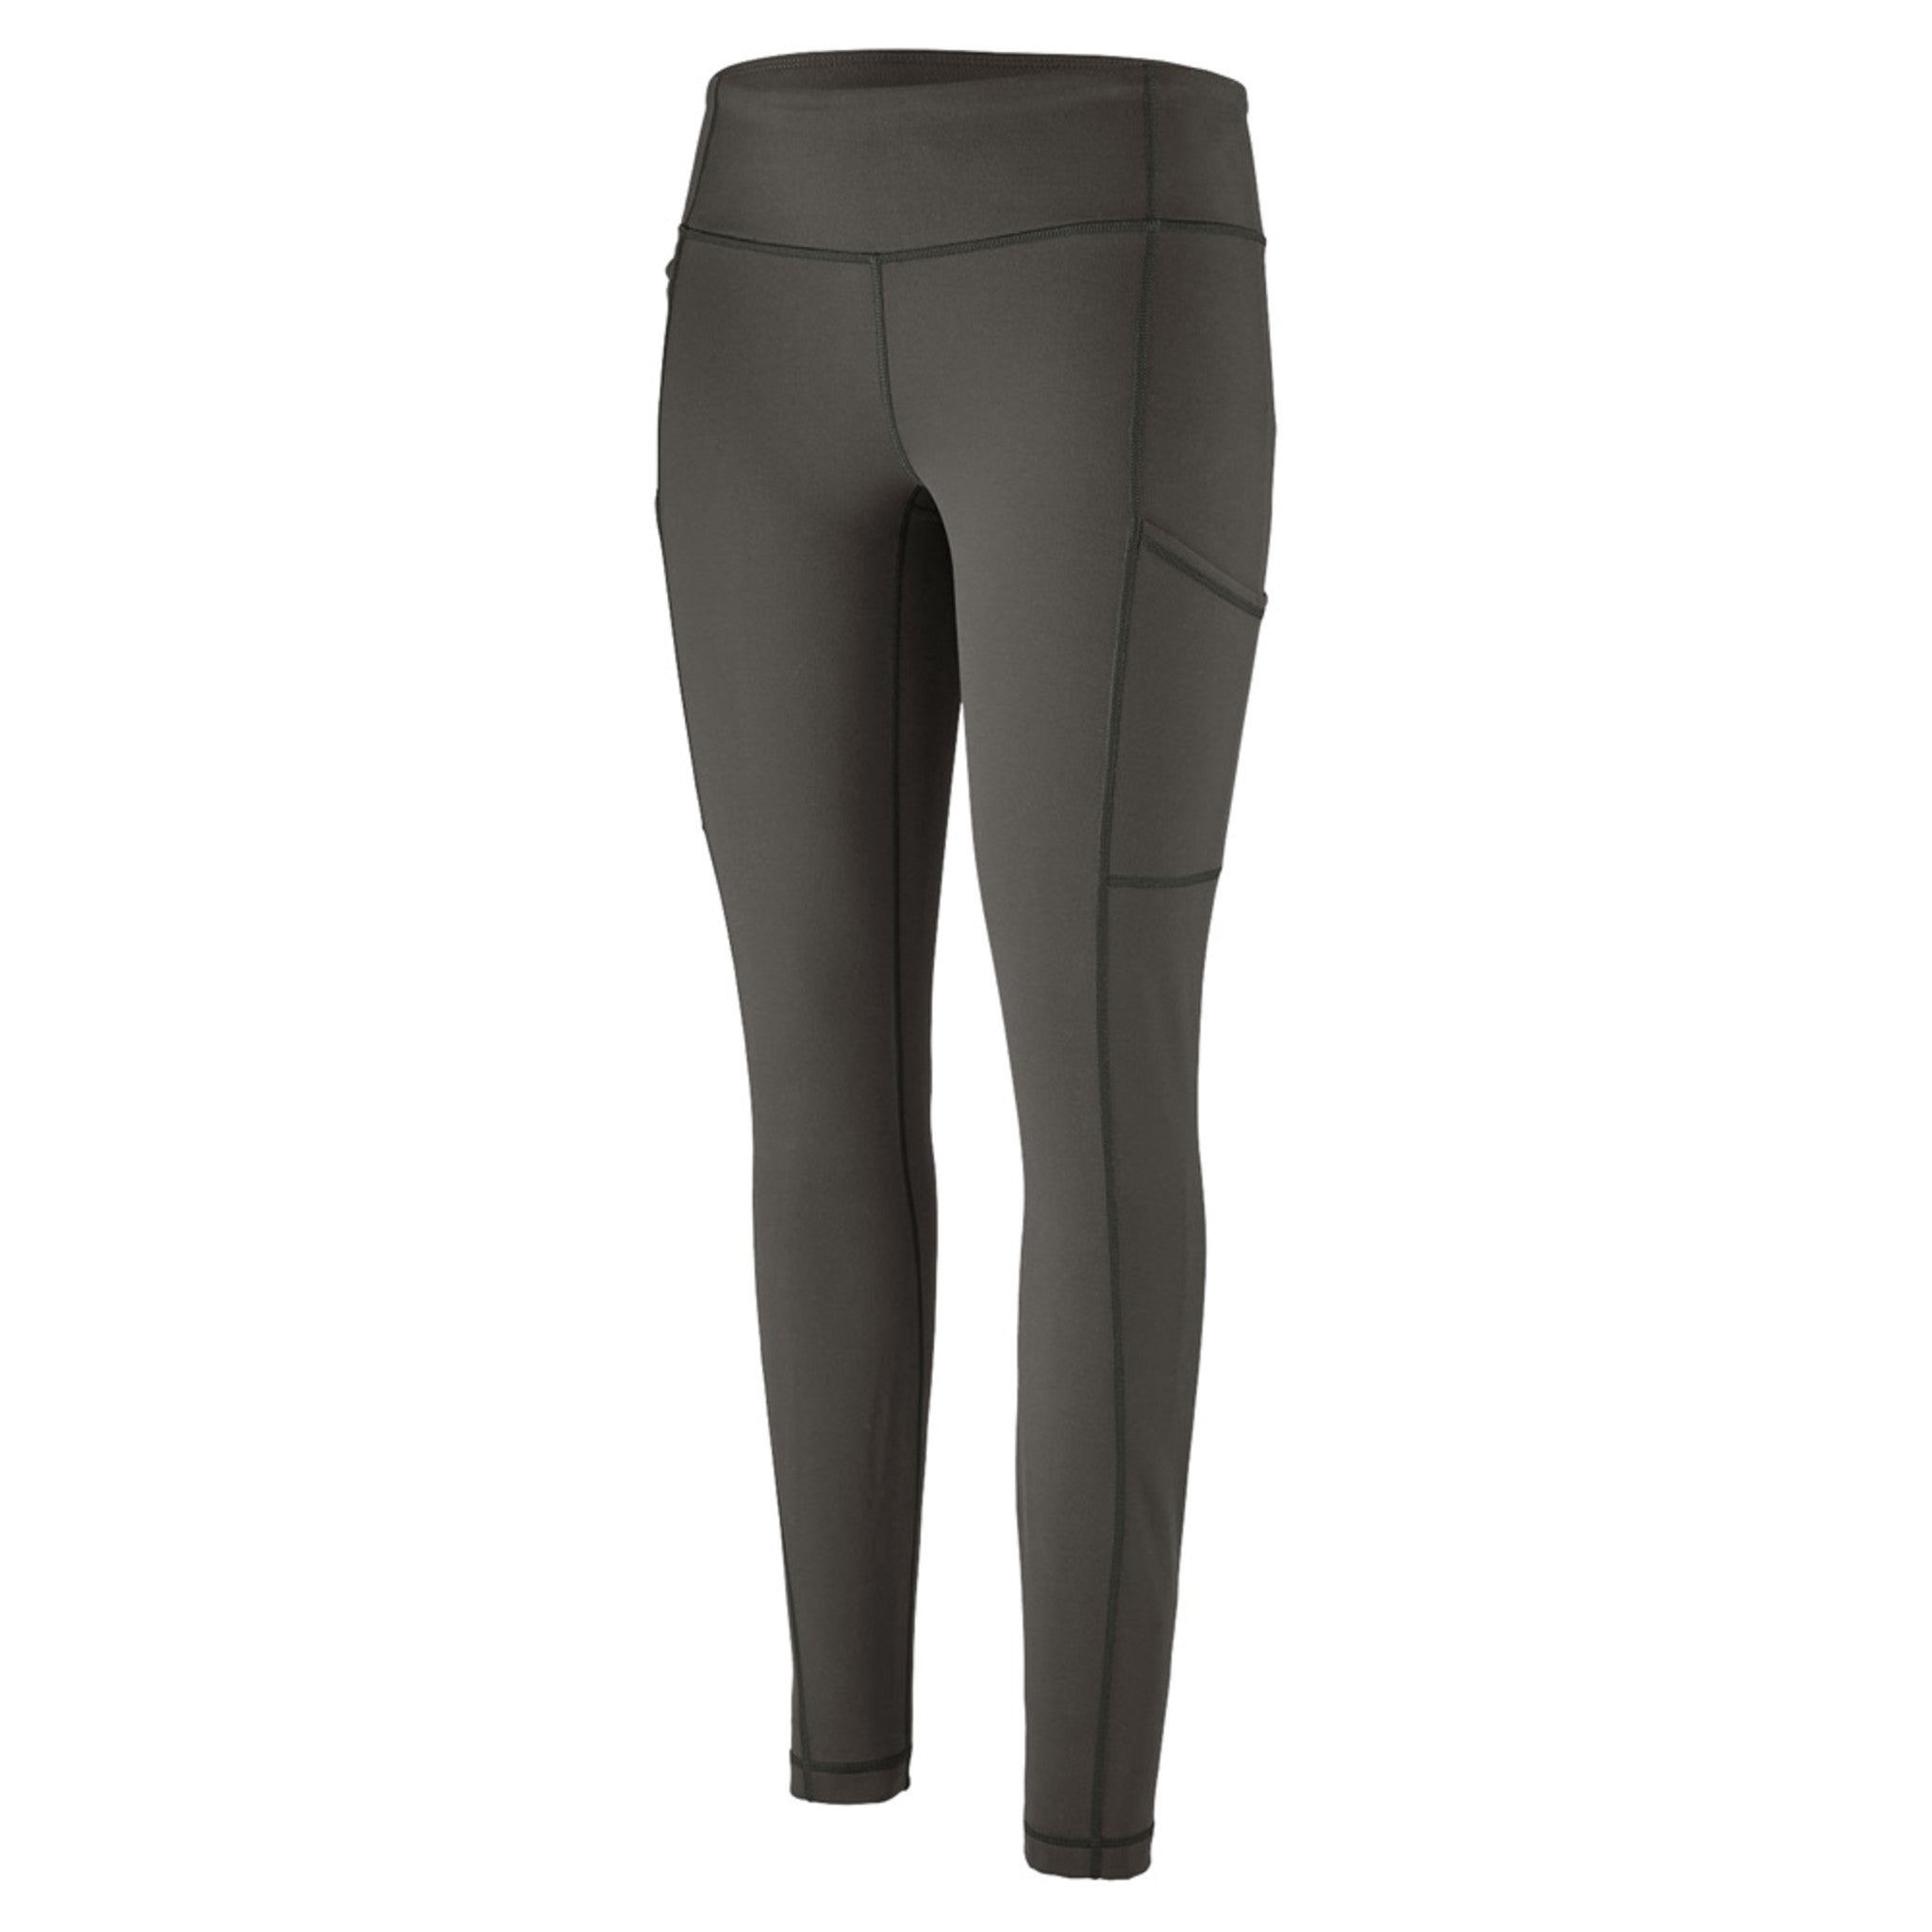 https://cdn.shopify.com/s/files/1/0670/5135/6456/files/patagonia-pack-out-women-s-tights-21995-forge-grey.jpg?v=1698686937